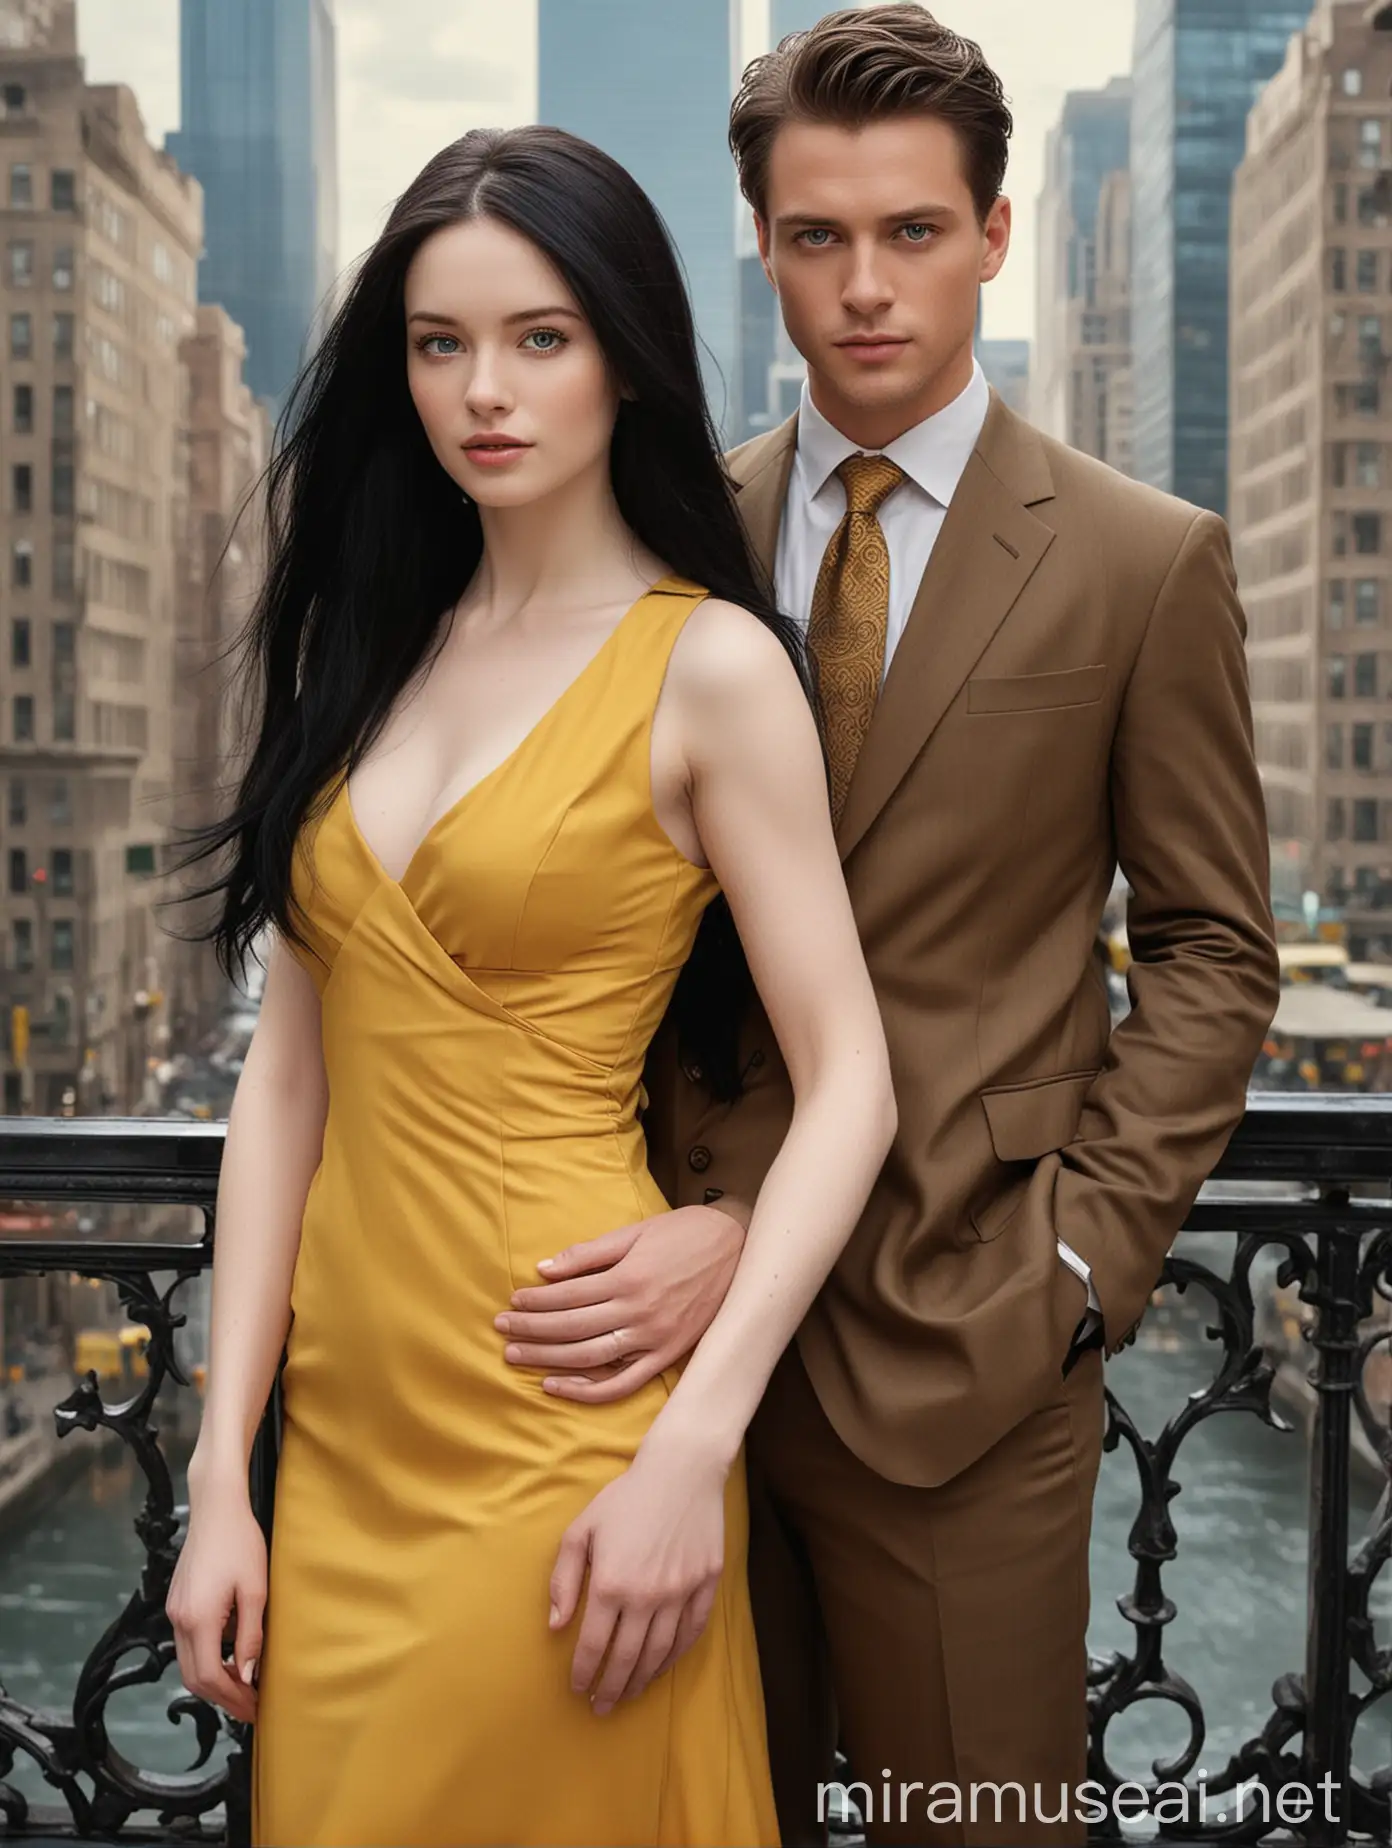 Elegant Couple in Cityscape Woman in Yellow Dress and Man in Business Attire